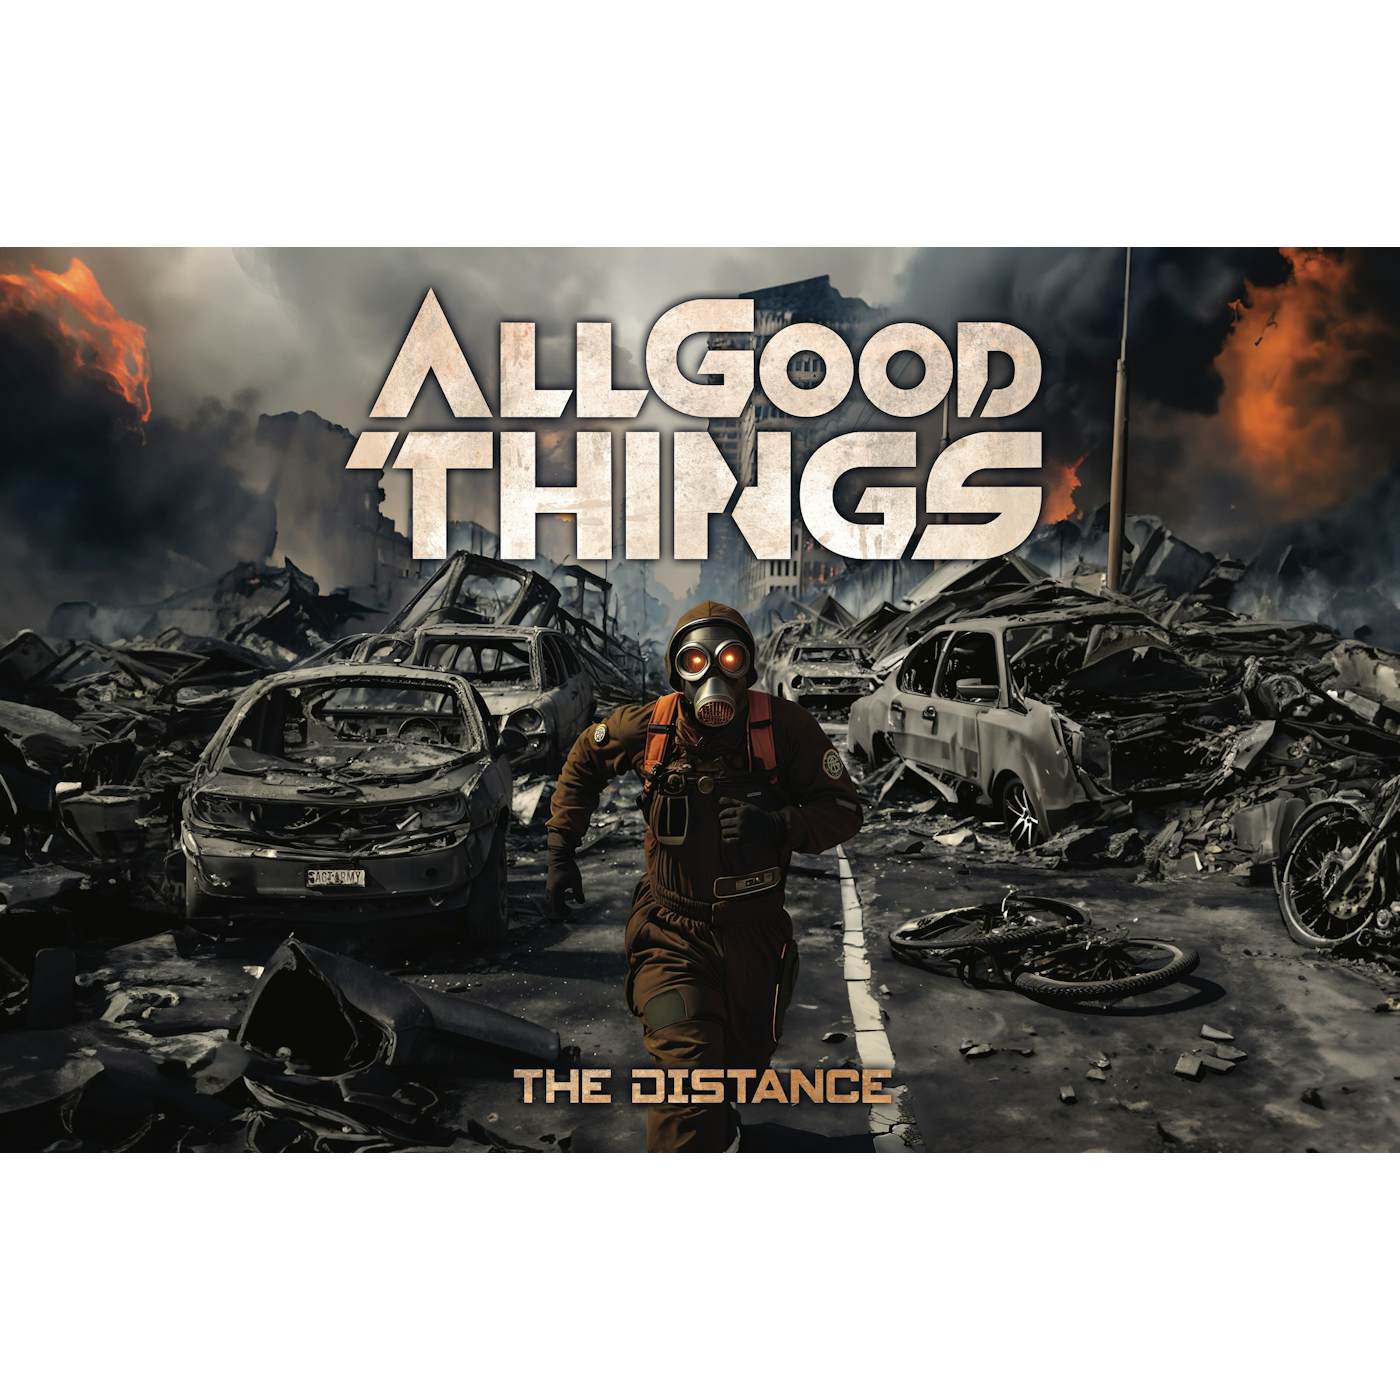 ALL GOOD THINGS - "THE DISTANCE" POSTER